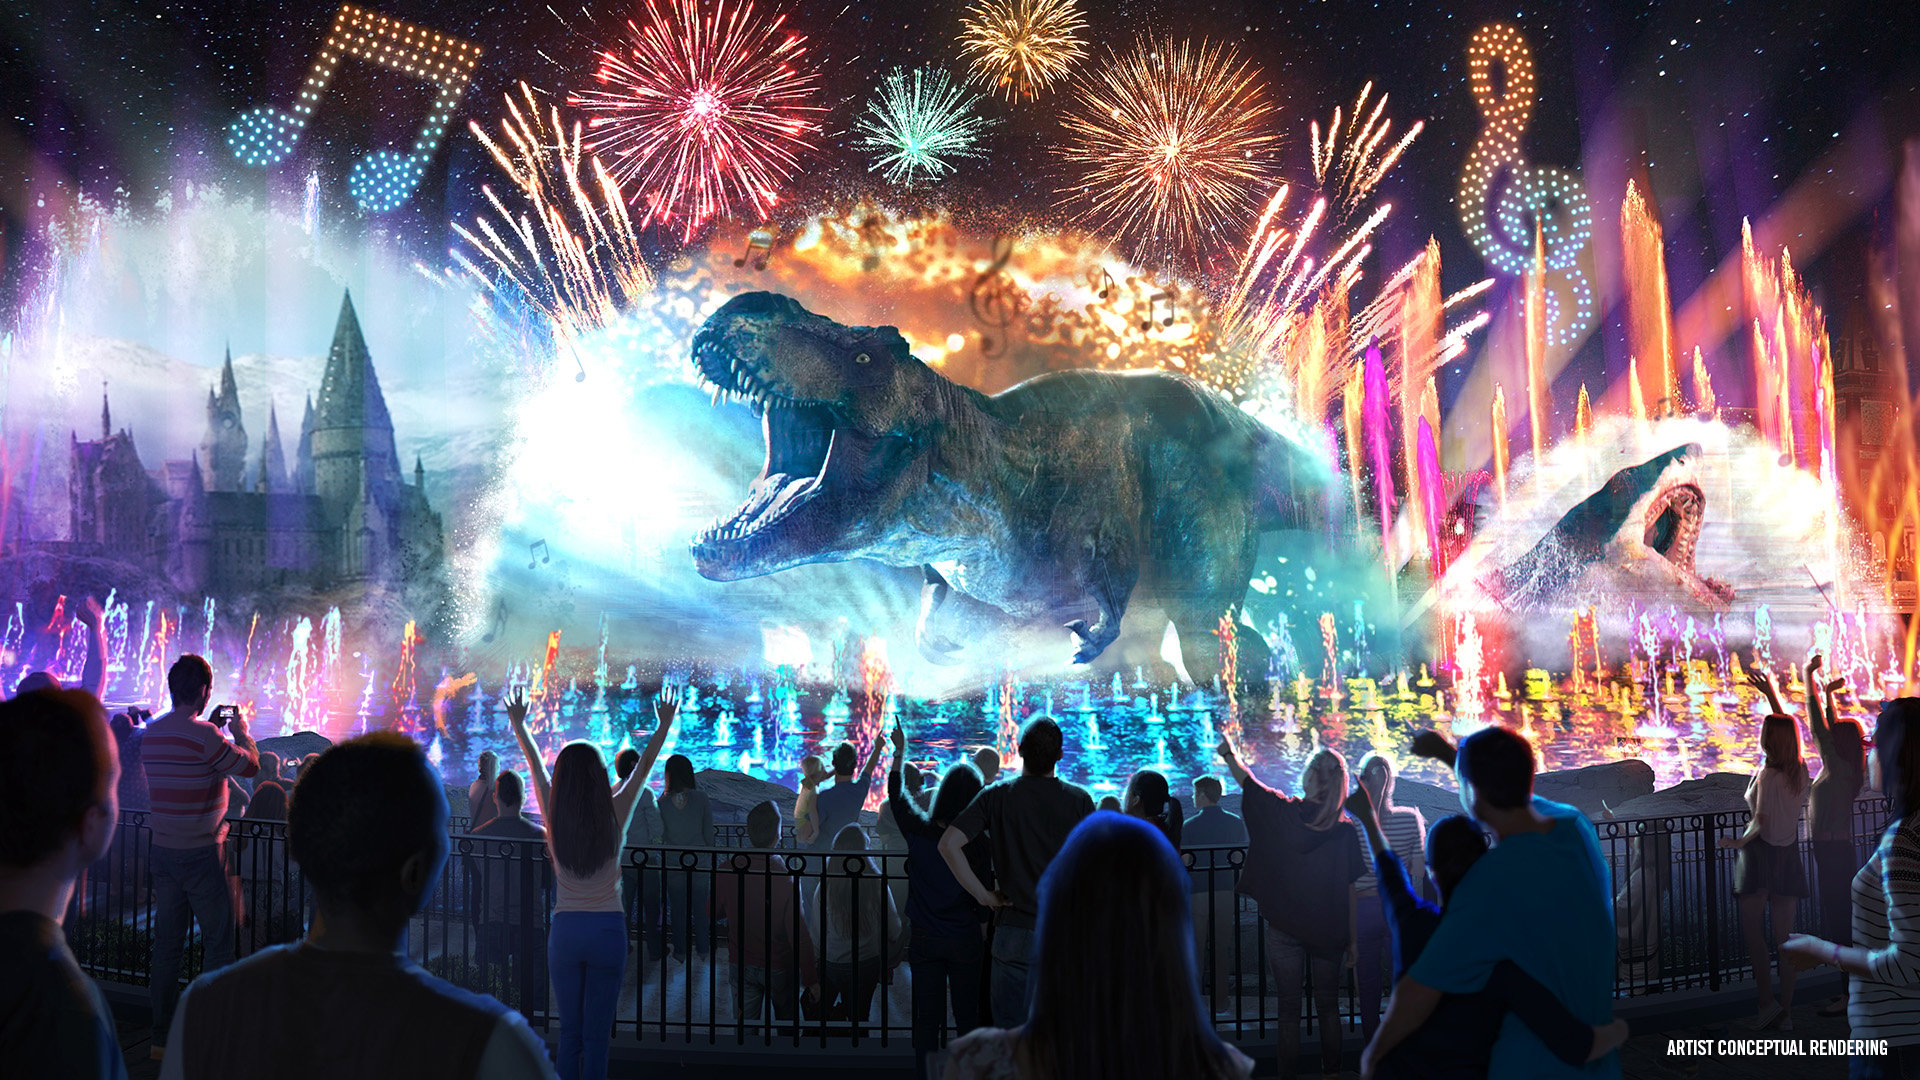 coming to universal orlando this summer: a new land, entertainment options, and nighttime shows